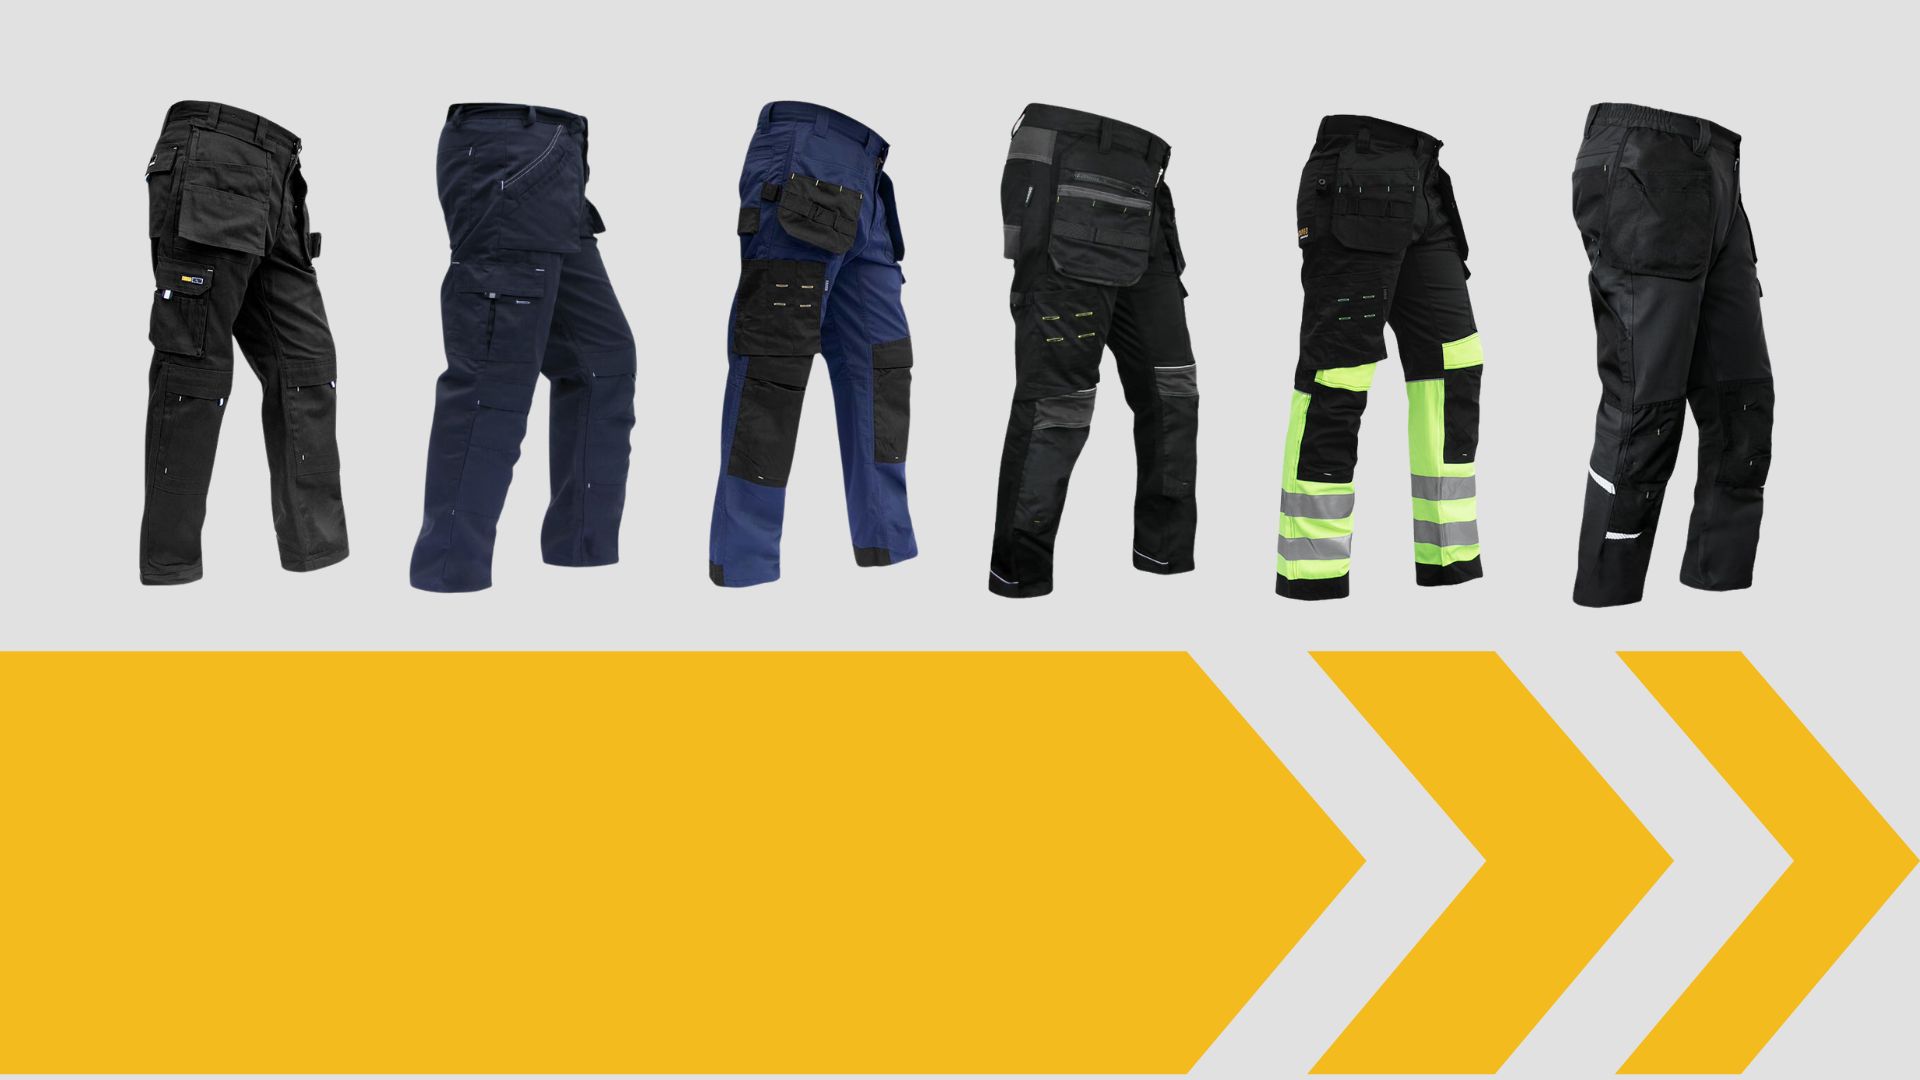 A selection of work trousers in a row